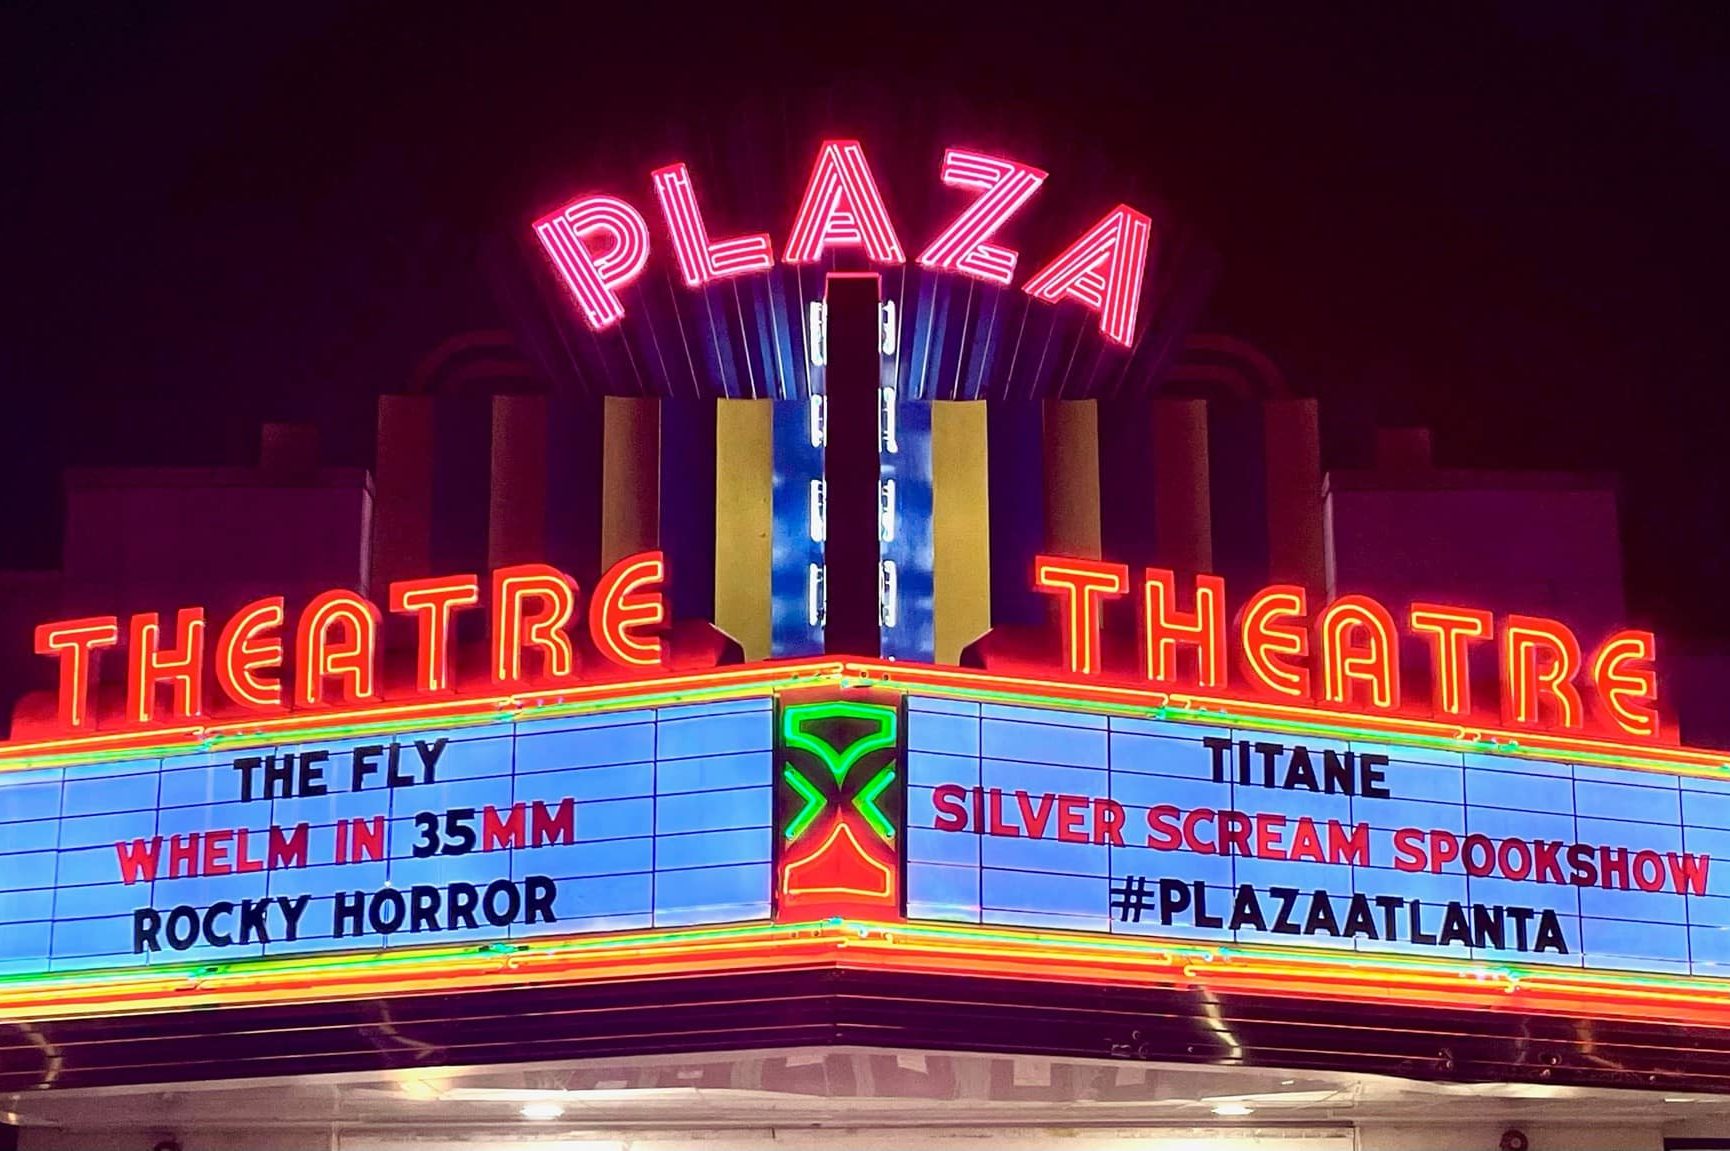 lit up image of the plaza theatre in atlanta